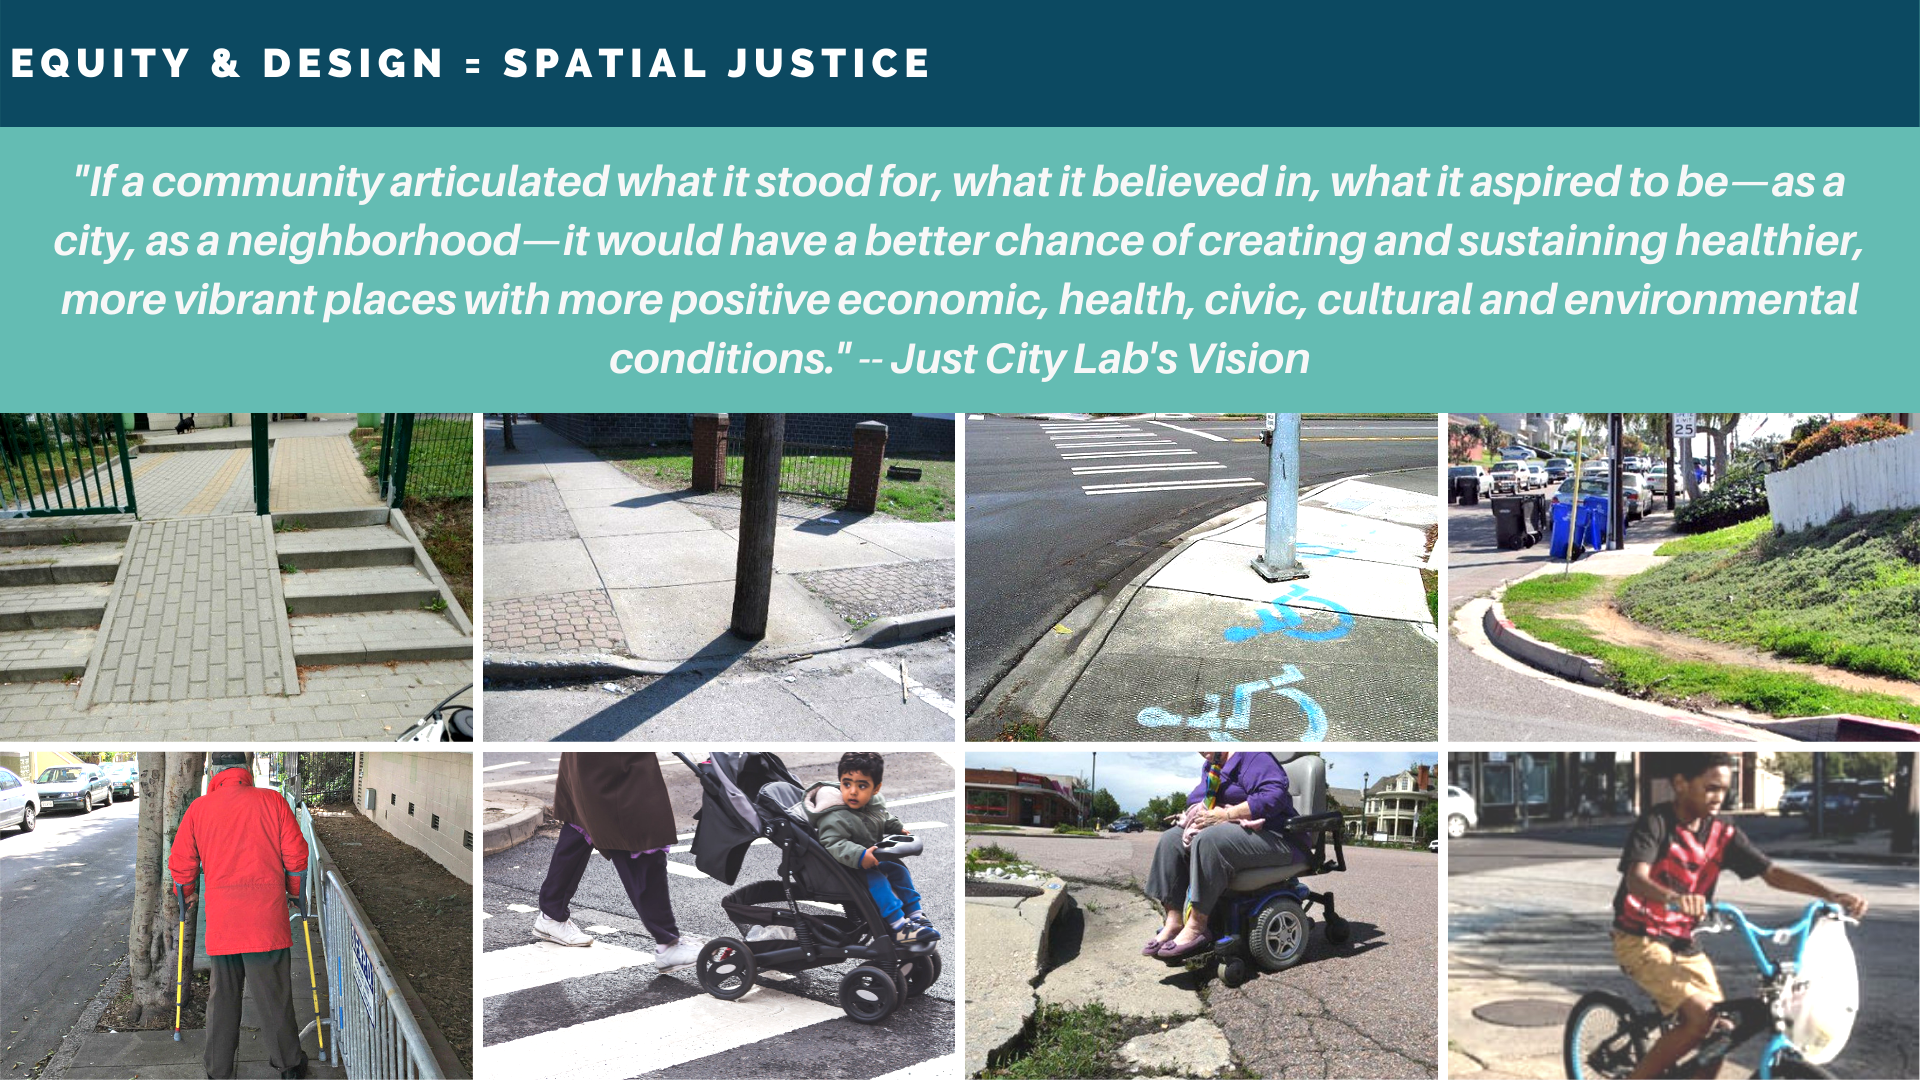  As to the design features that directly impact equity.  Many urban design features disproportionately impact vulnerable populations, including the presence, and condition, of sidewalks, and curbcuts,; sidewalk barriers; midblock crossings; street le